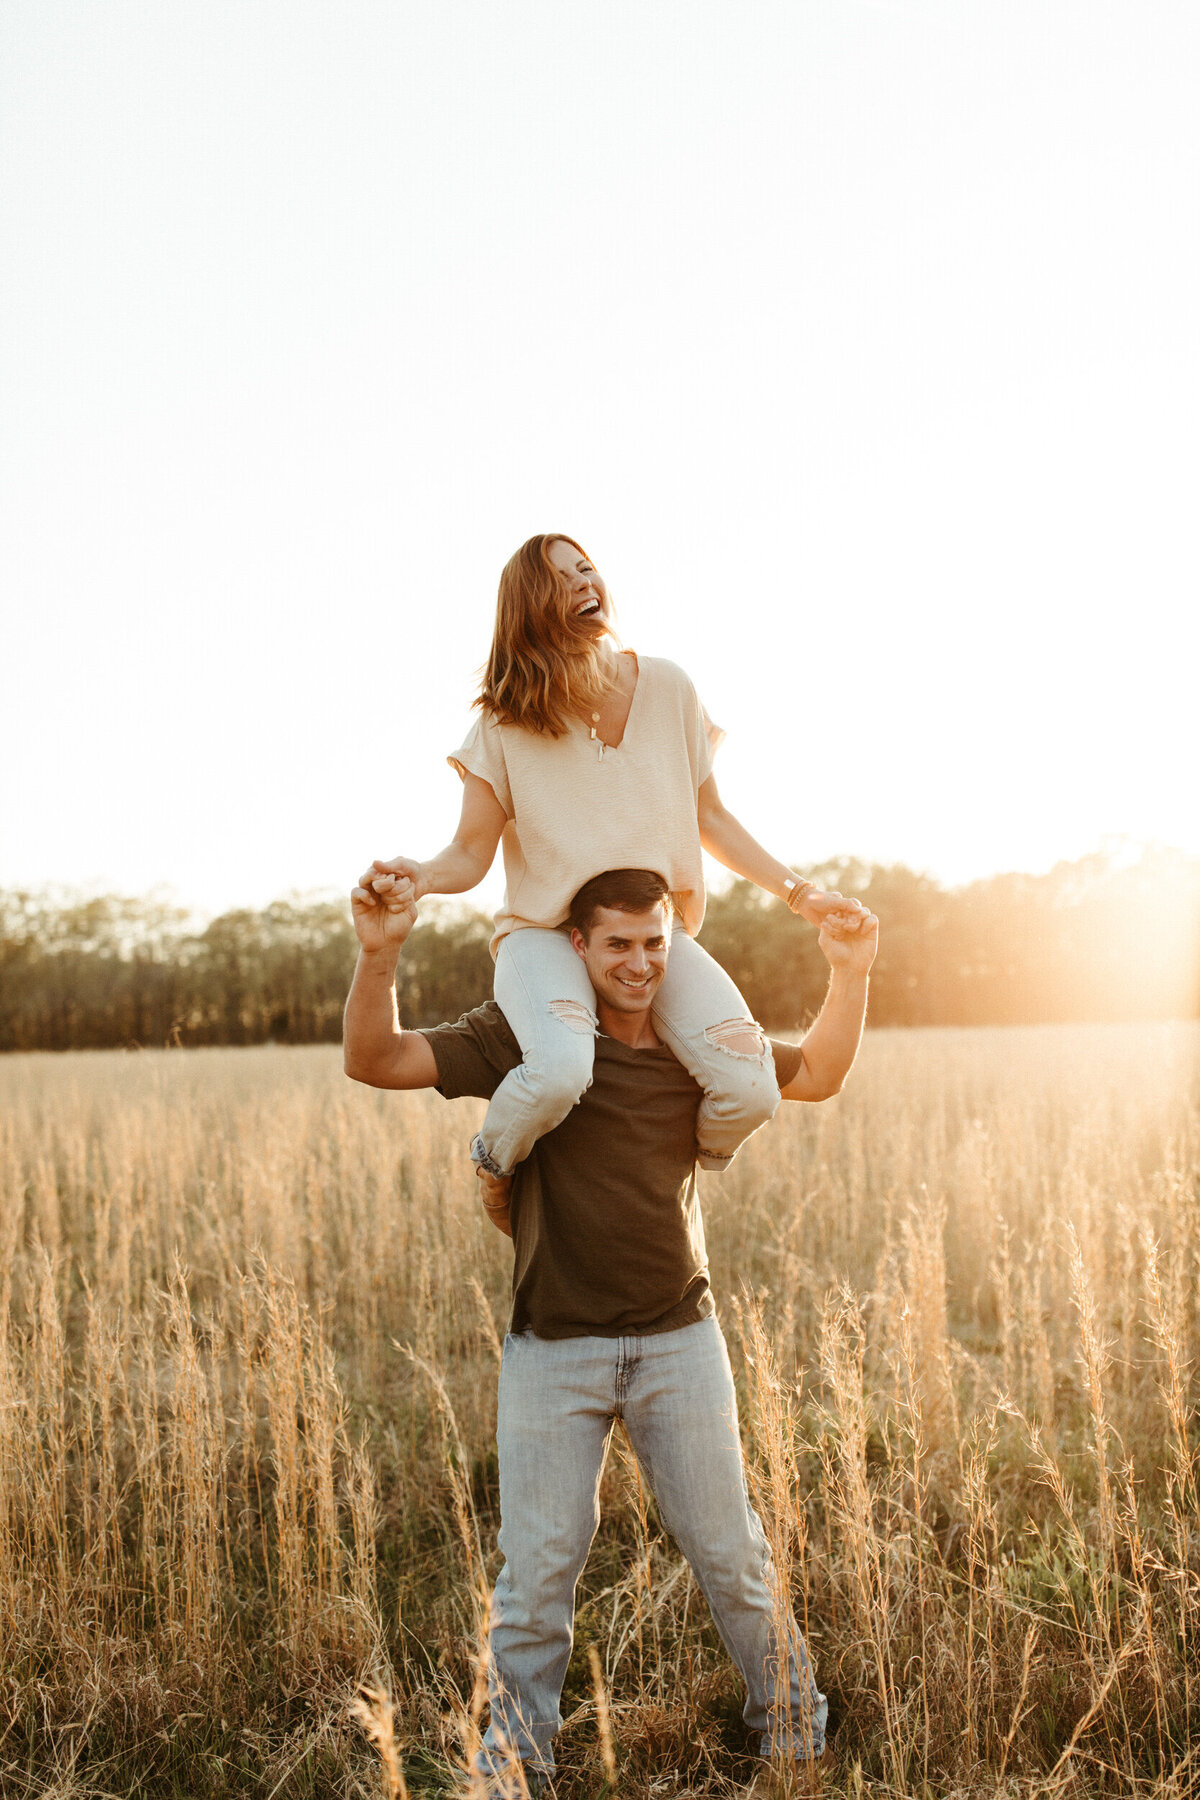 A girl is on top of a guy's shoulders as they laugh and walk through a field with tall grass at sunset.